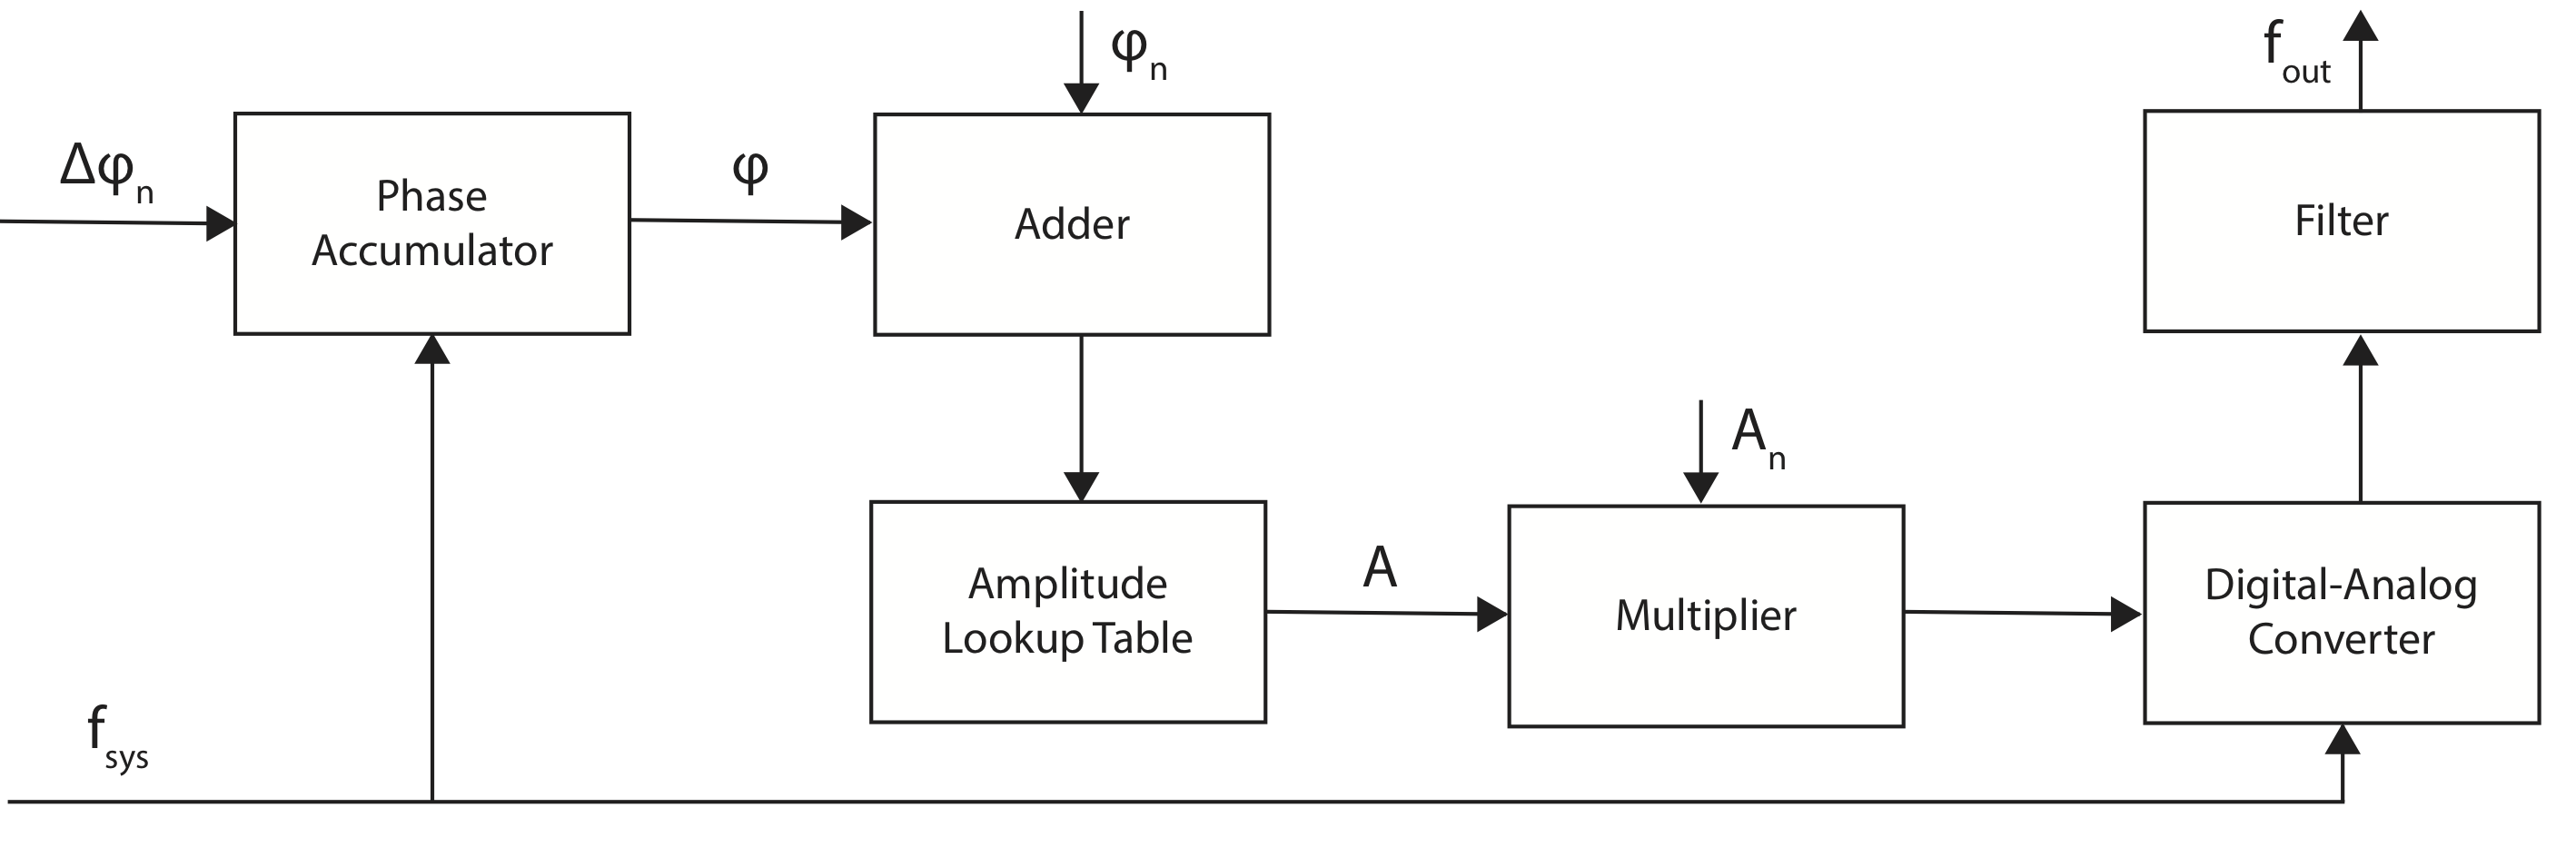 digital signal synthesis advanced architecture